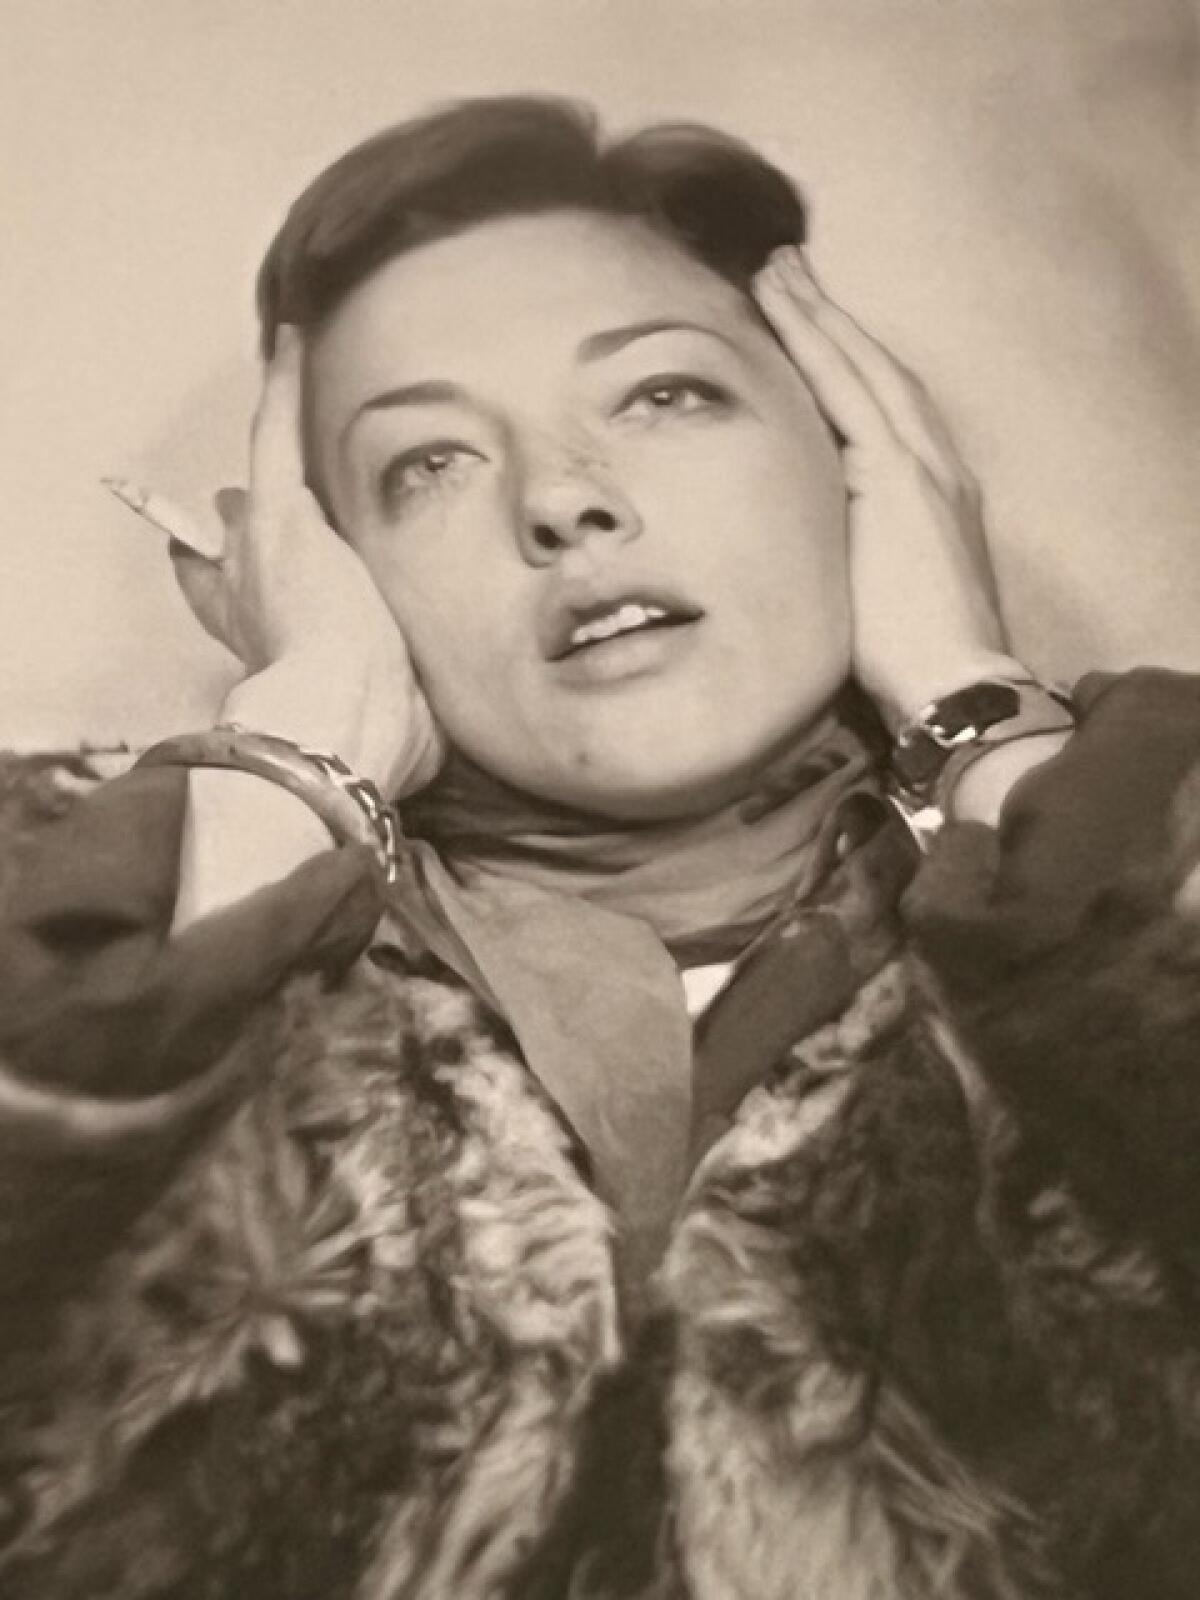 A sepia-toned photo of a woman looking upward, her hands on either side of her face.